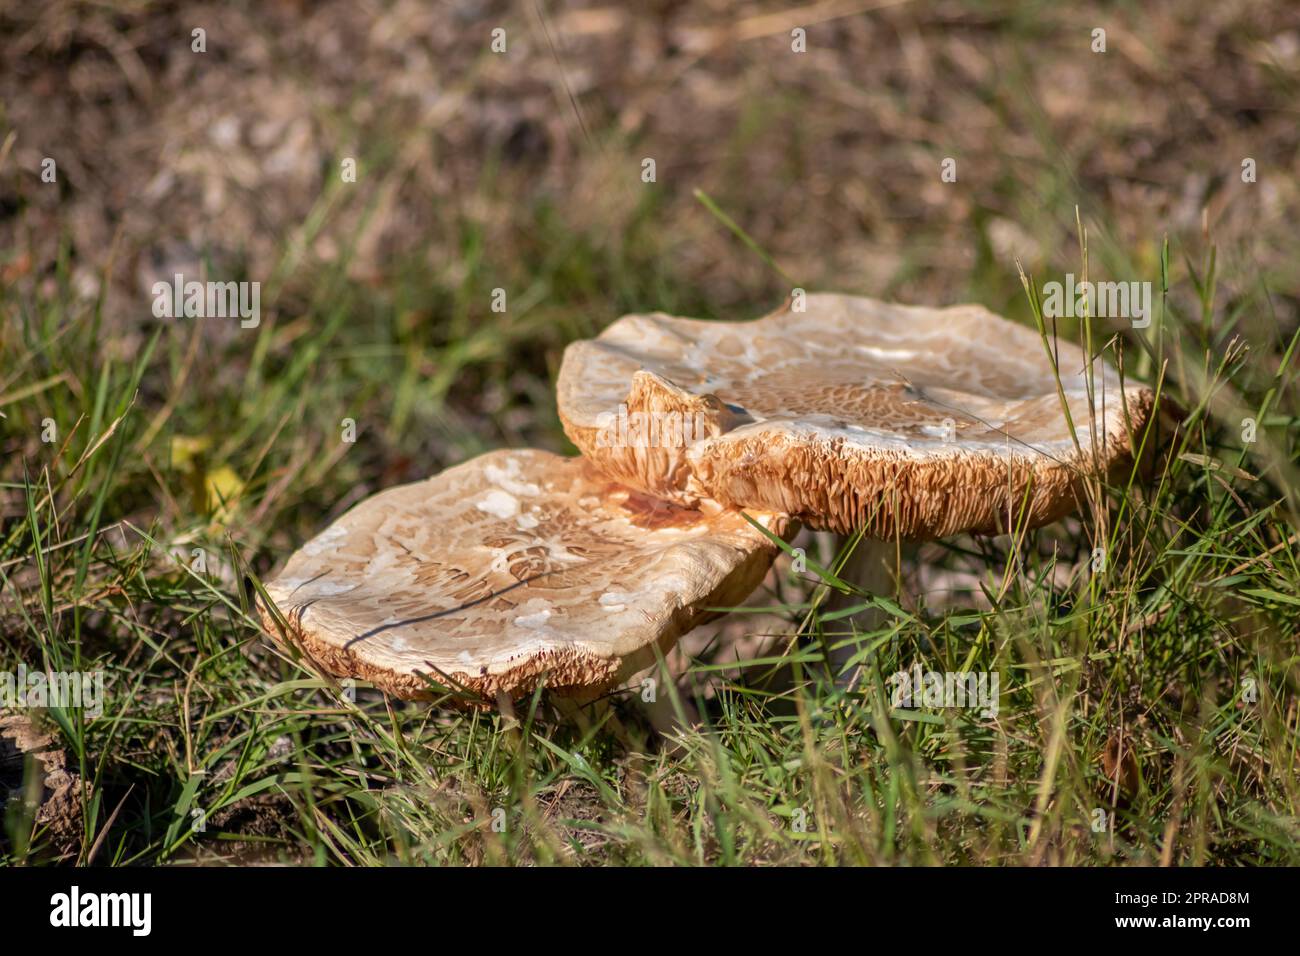 Big mushrooms in a forest found on mushrooming tour in autumn with brown foliage in backlight on the ground in mushroom season as delicious but possibly poisonous and dangerous forest fruit Stock Photo